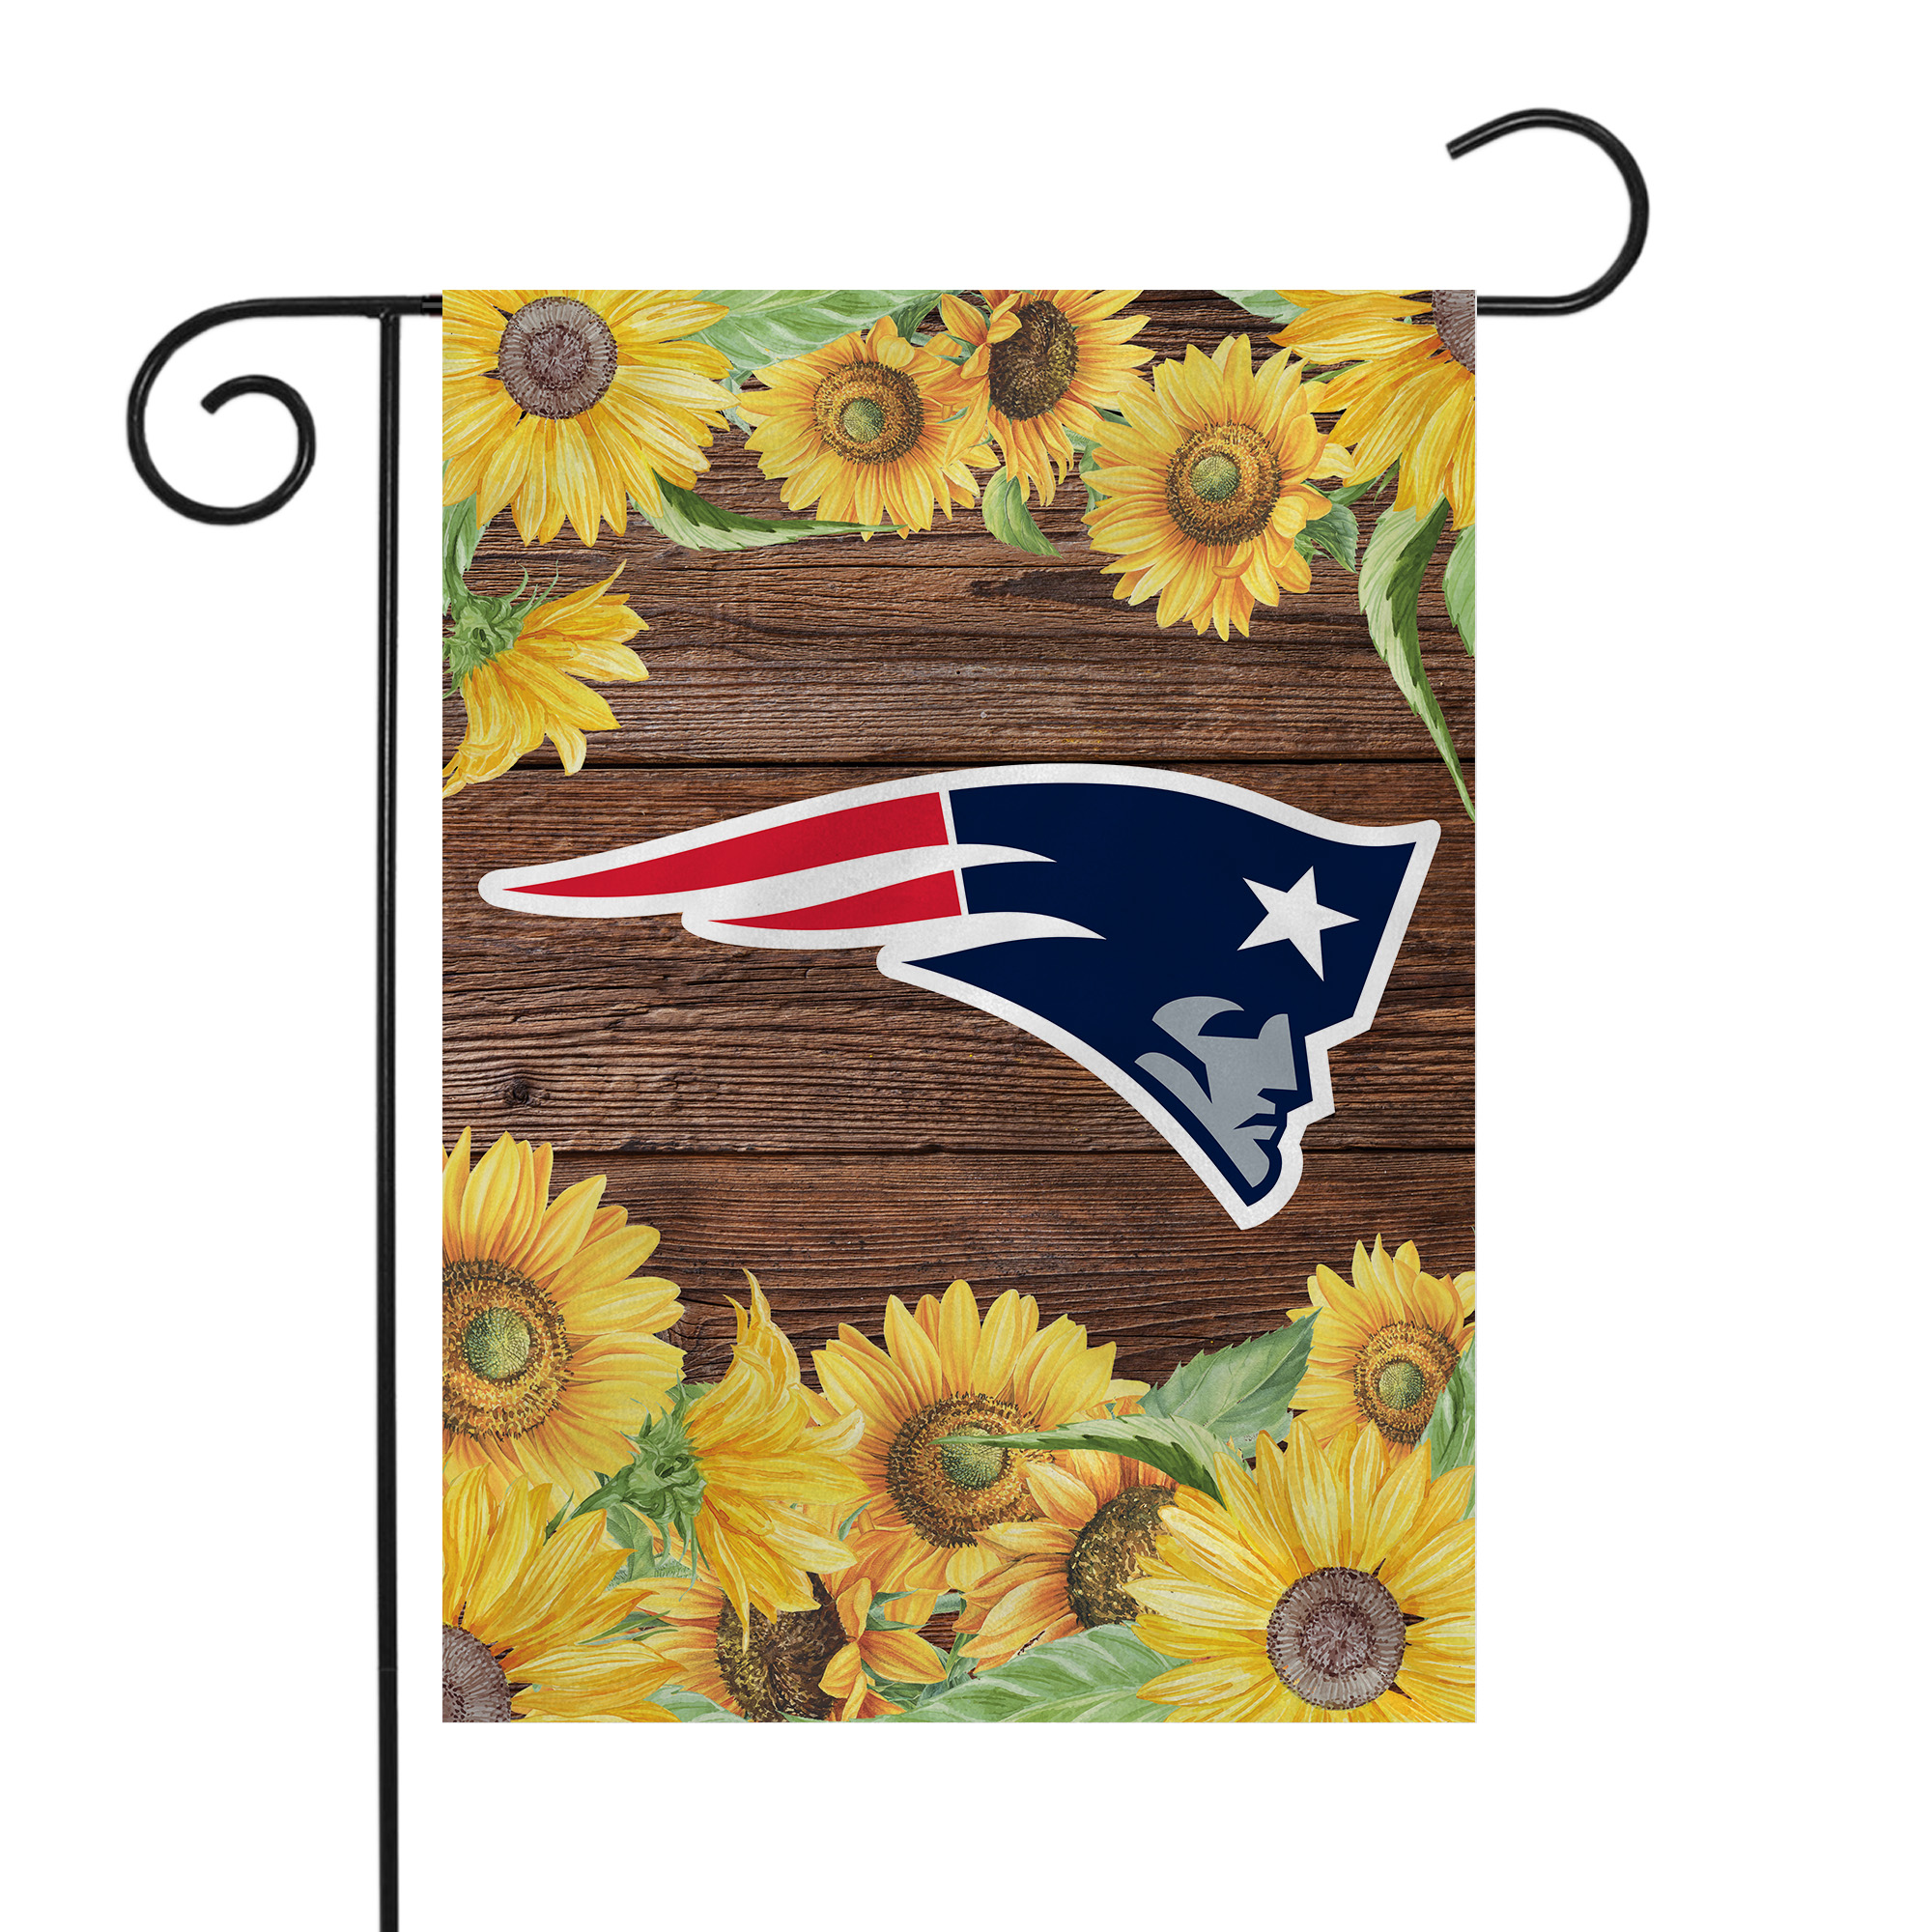 Rico Industries NFL Football New England Patriots Sunflower Spring Double Sided Garden Flag